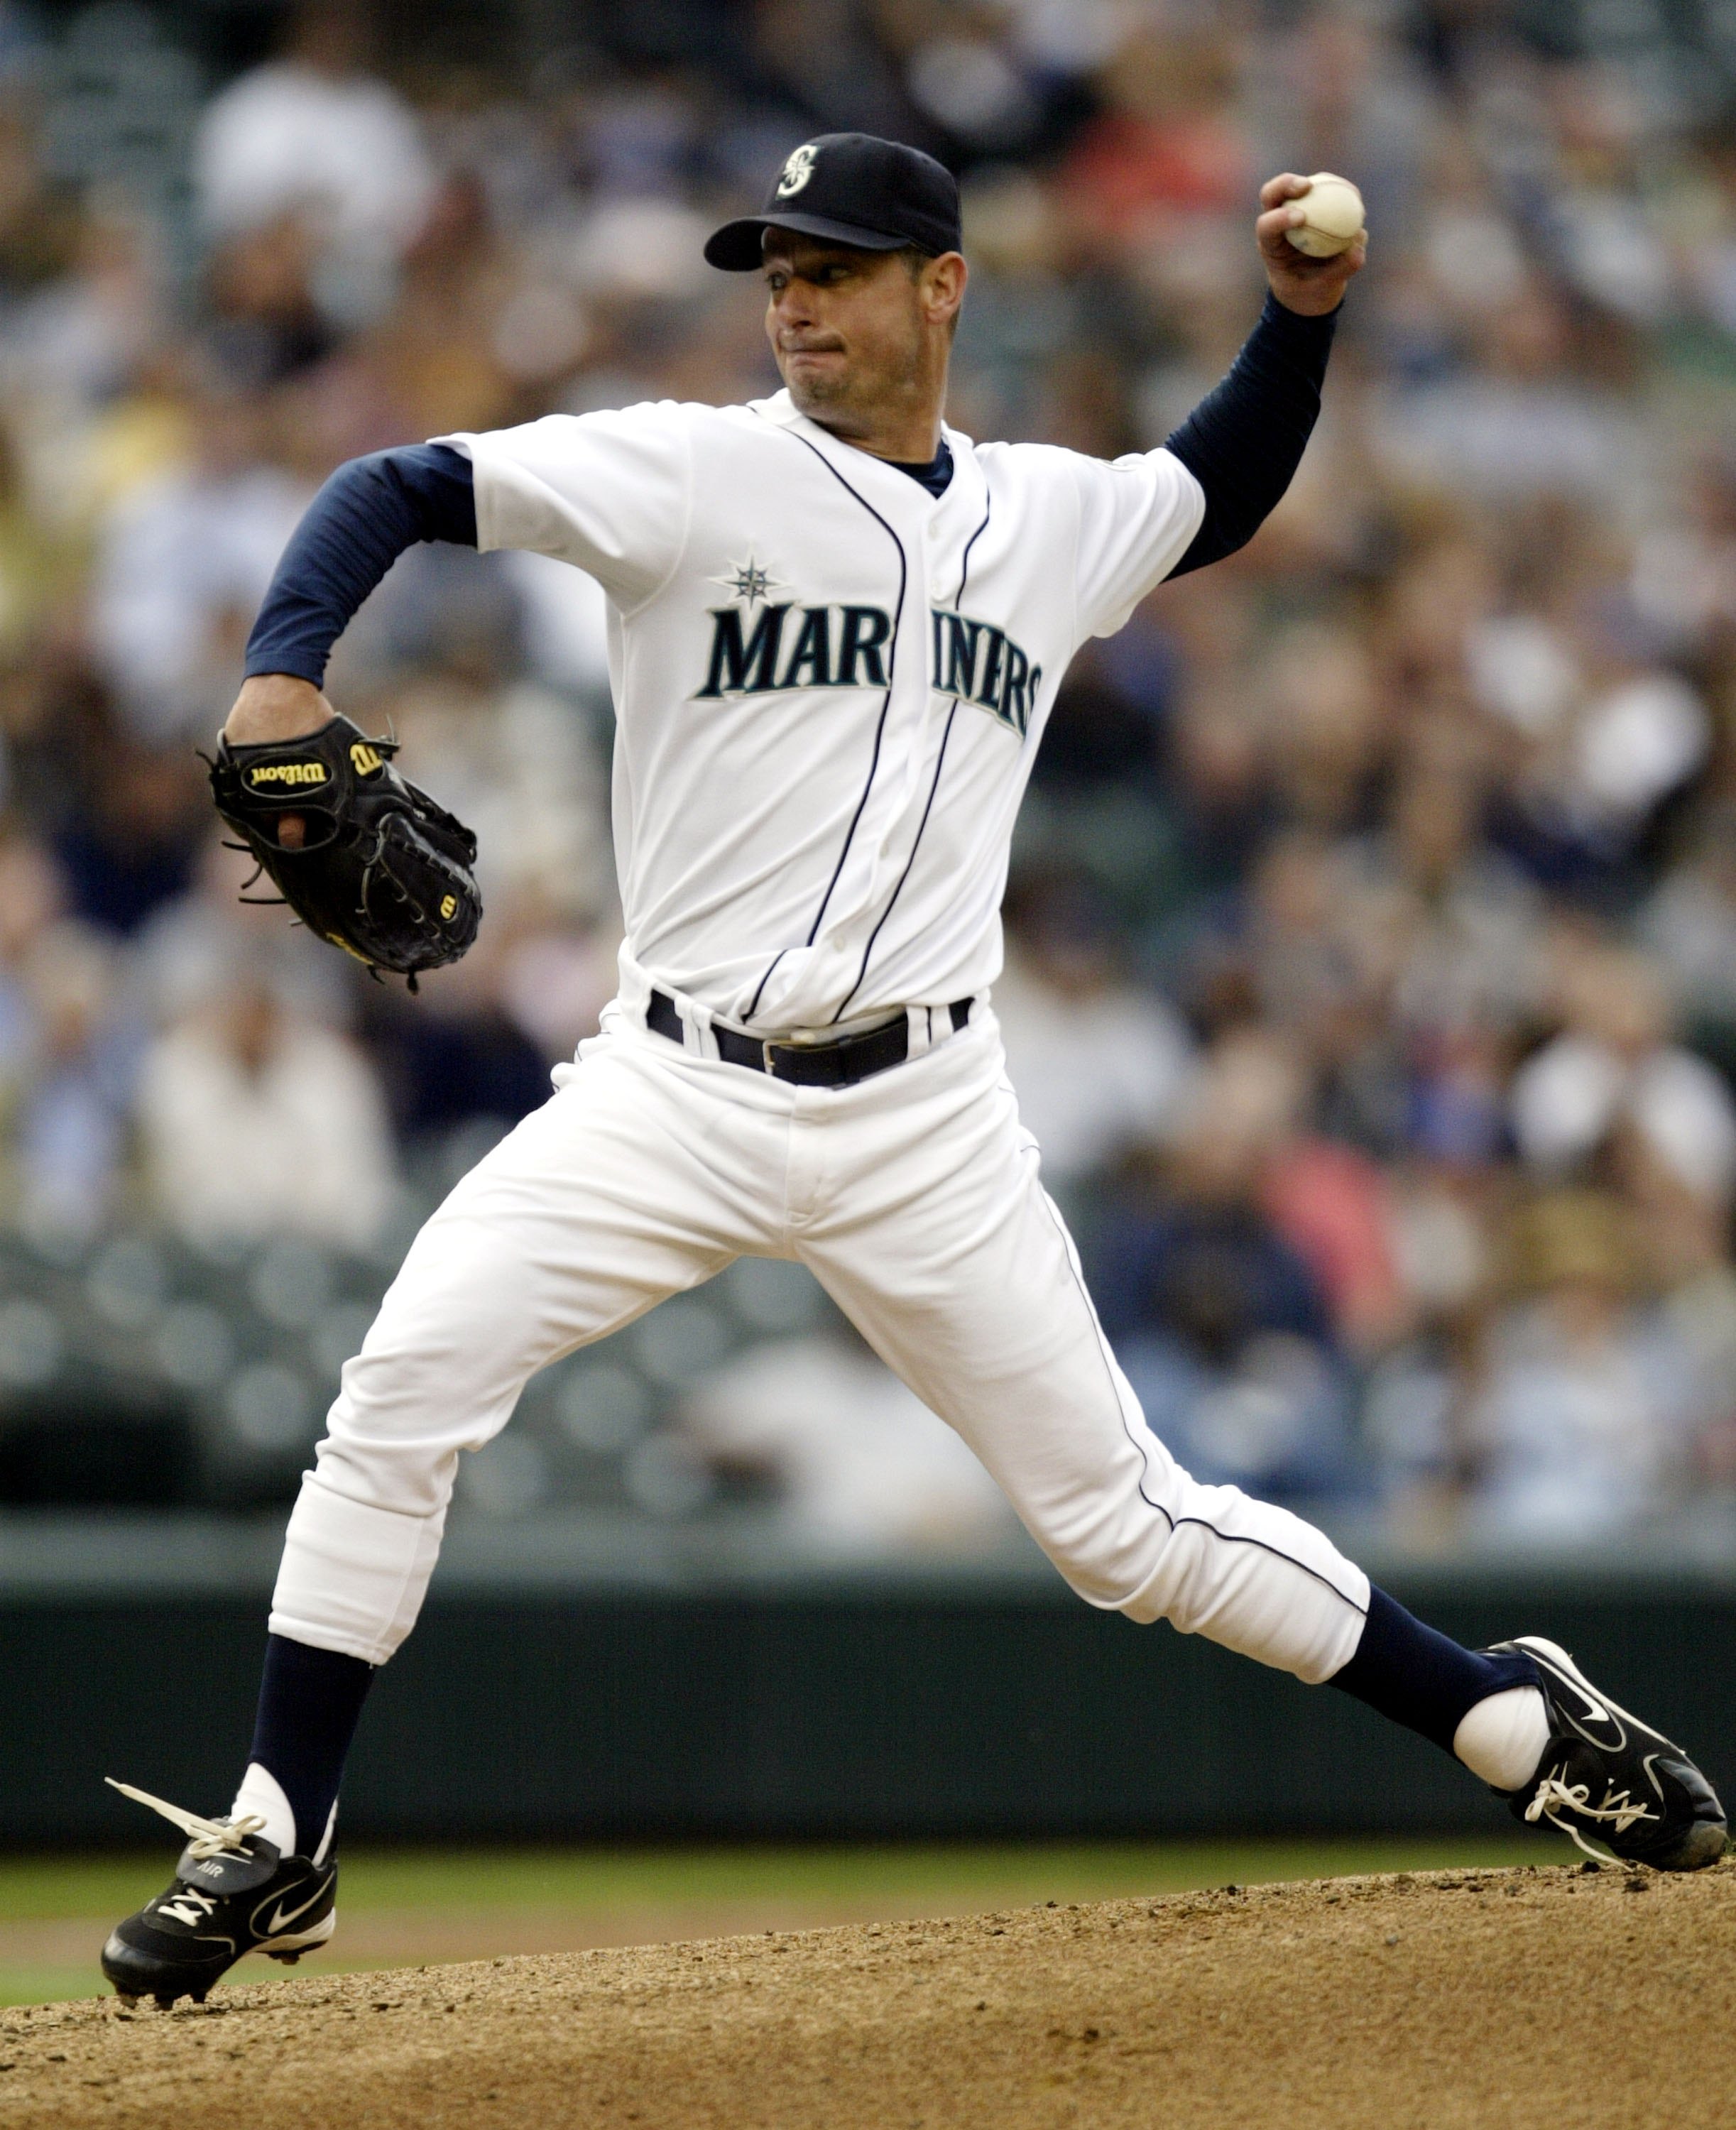 On This Date: Mariners Acquire Jamie Moyer from Boston, by Mariners PR